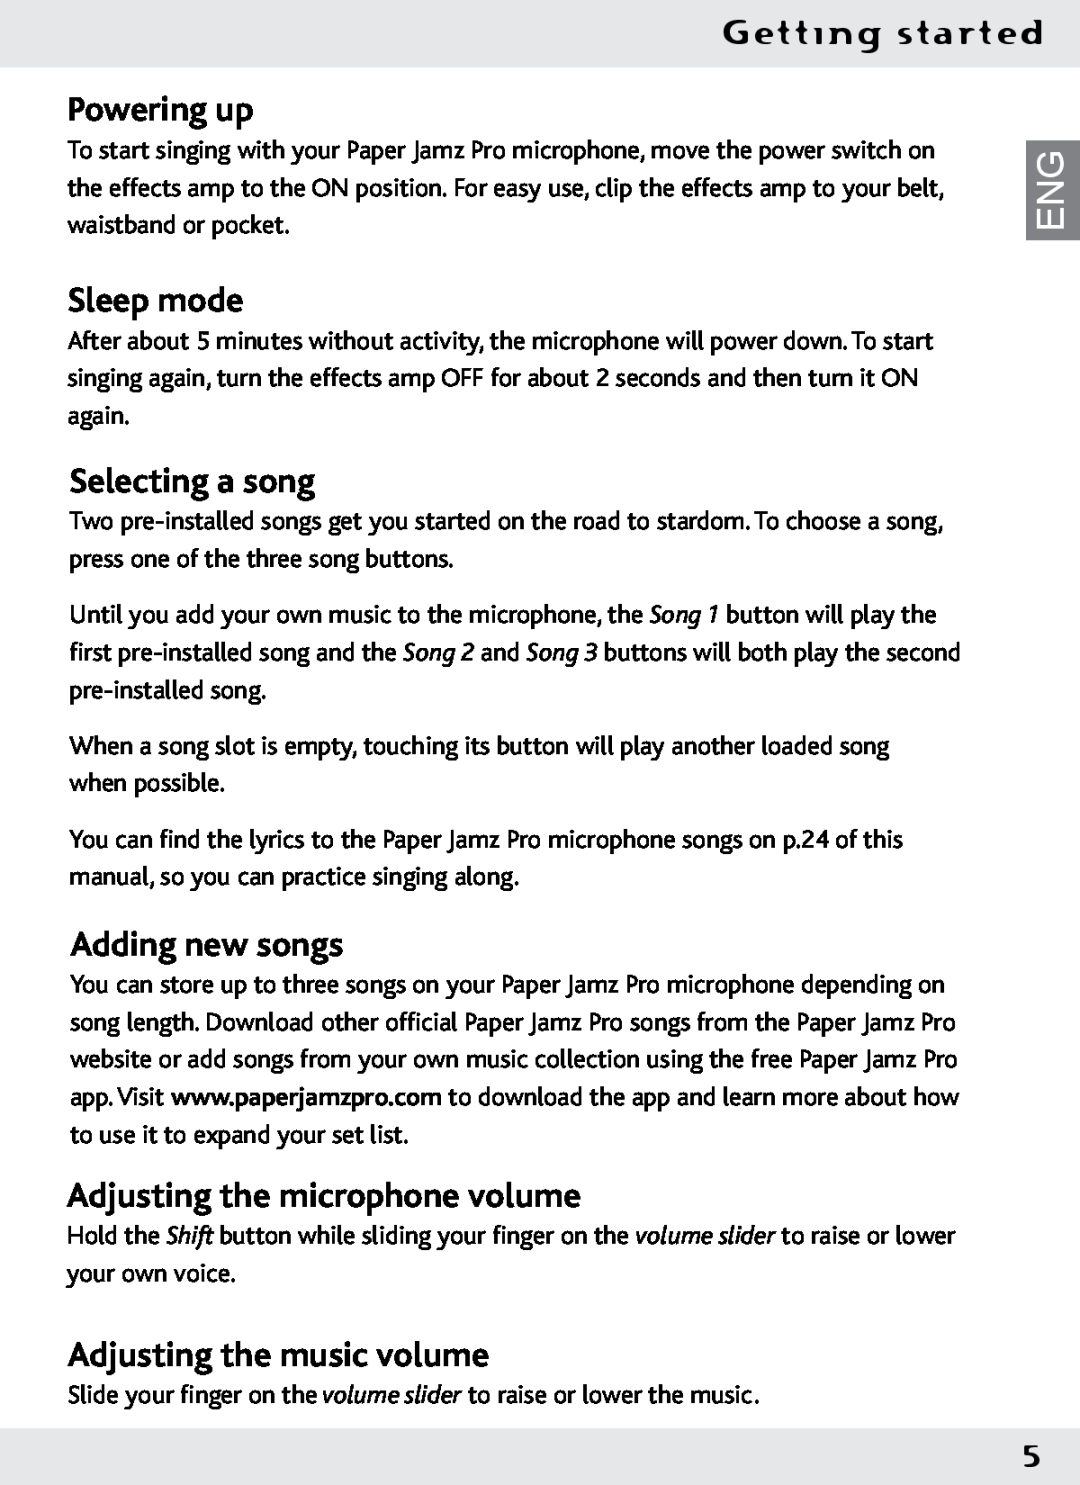 Wow Wee 62473 user manual Powering up, Sleep mode, Selecting a song, Adding new songs, Adjusting the microphone volume 